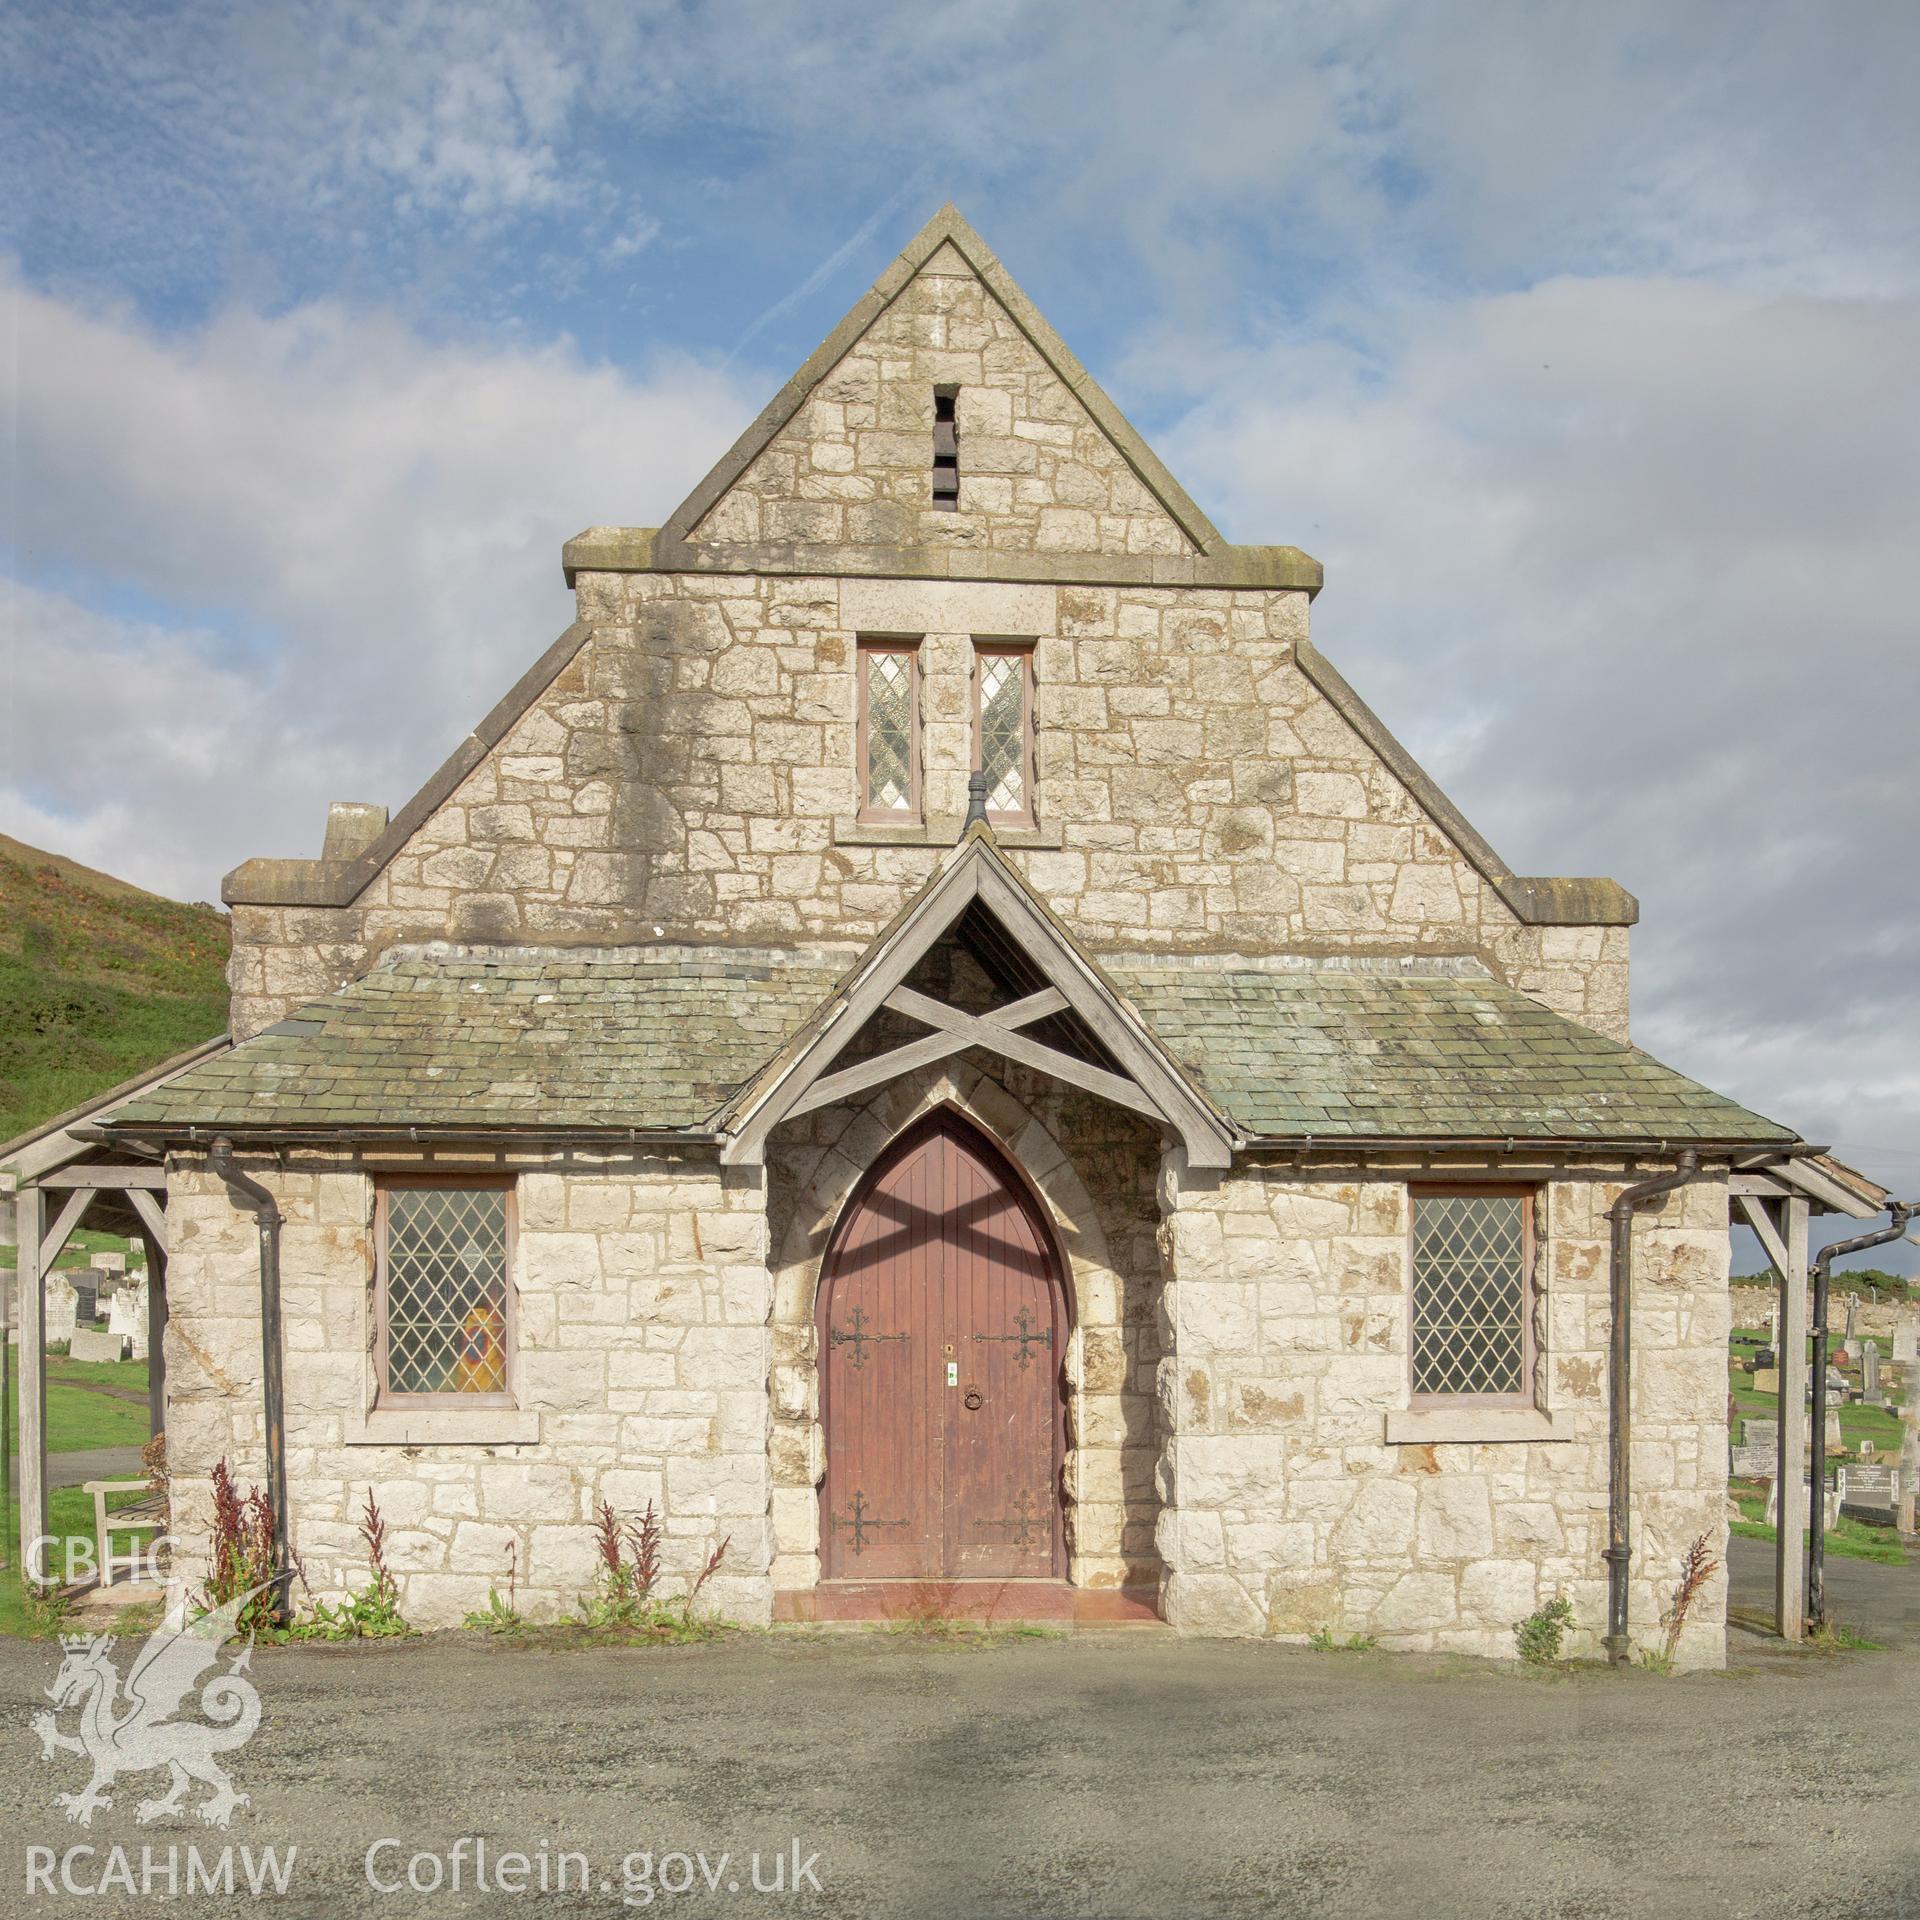 Colour photograph showing front elevation and entrance of the Great Orme Cemetery chapel near St. Tudno's church, Llandudno. Photographed by Richard Barrett on 17th September 2018.